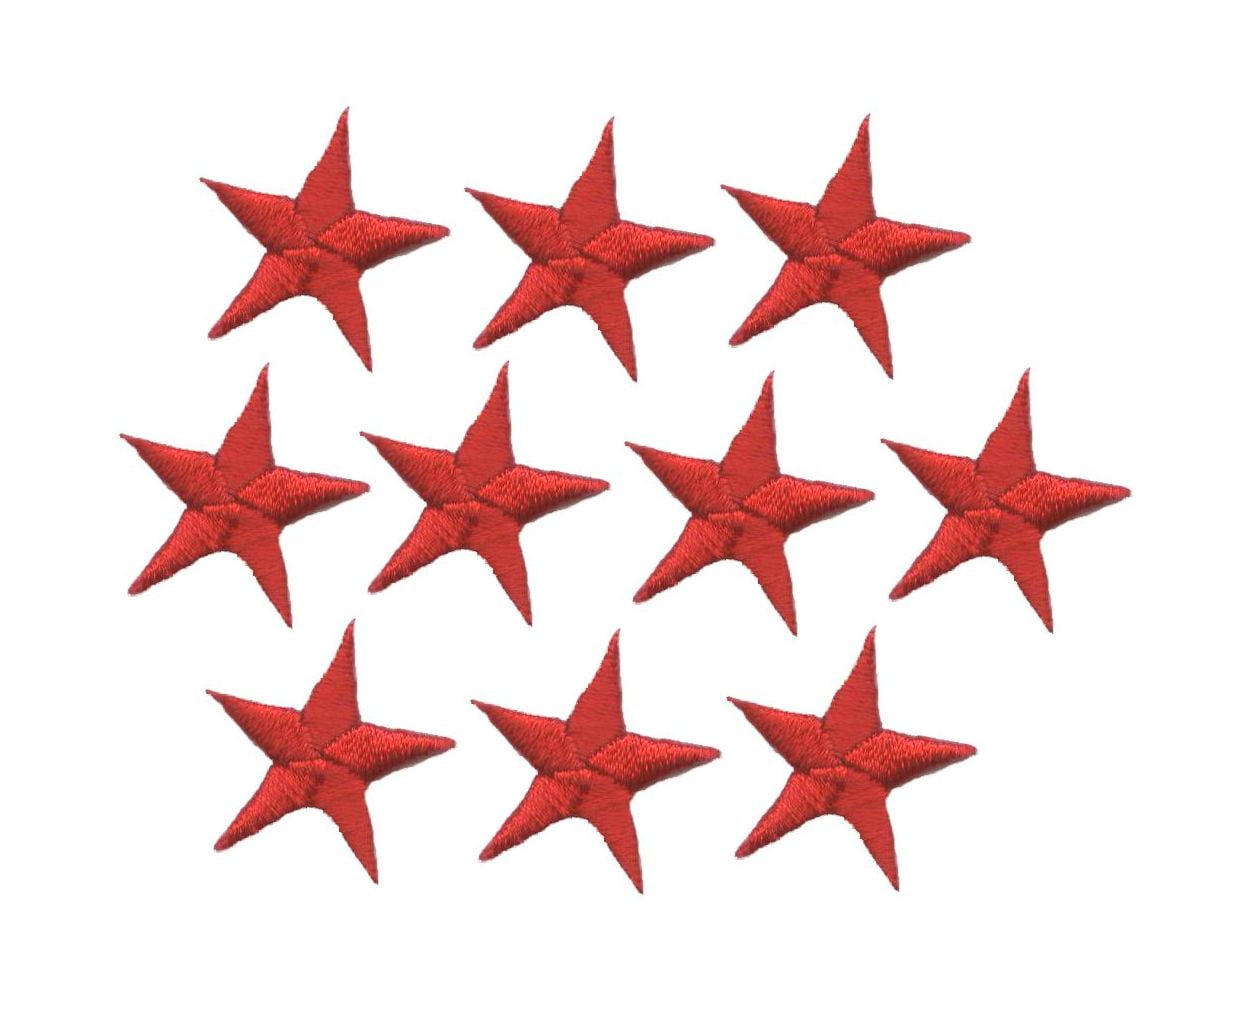 Red ETDesign #E02197 Embroidery Iron On Star Applique Patch 3 by 3 